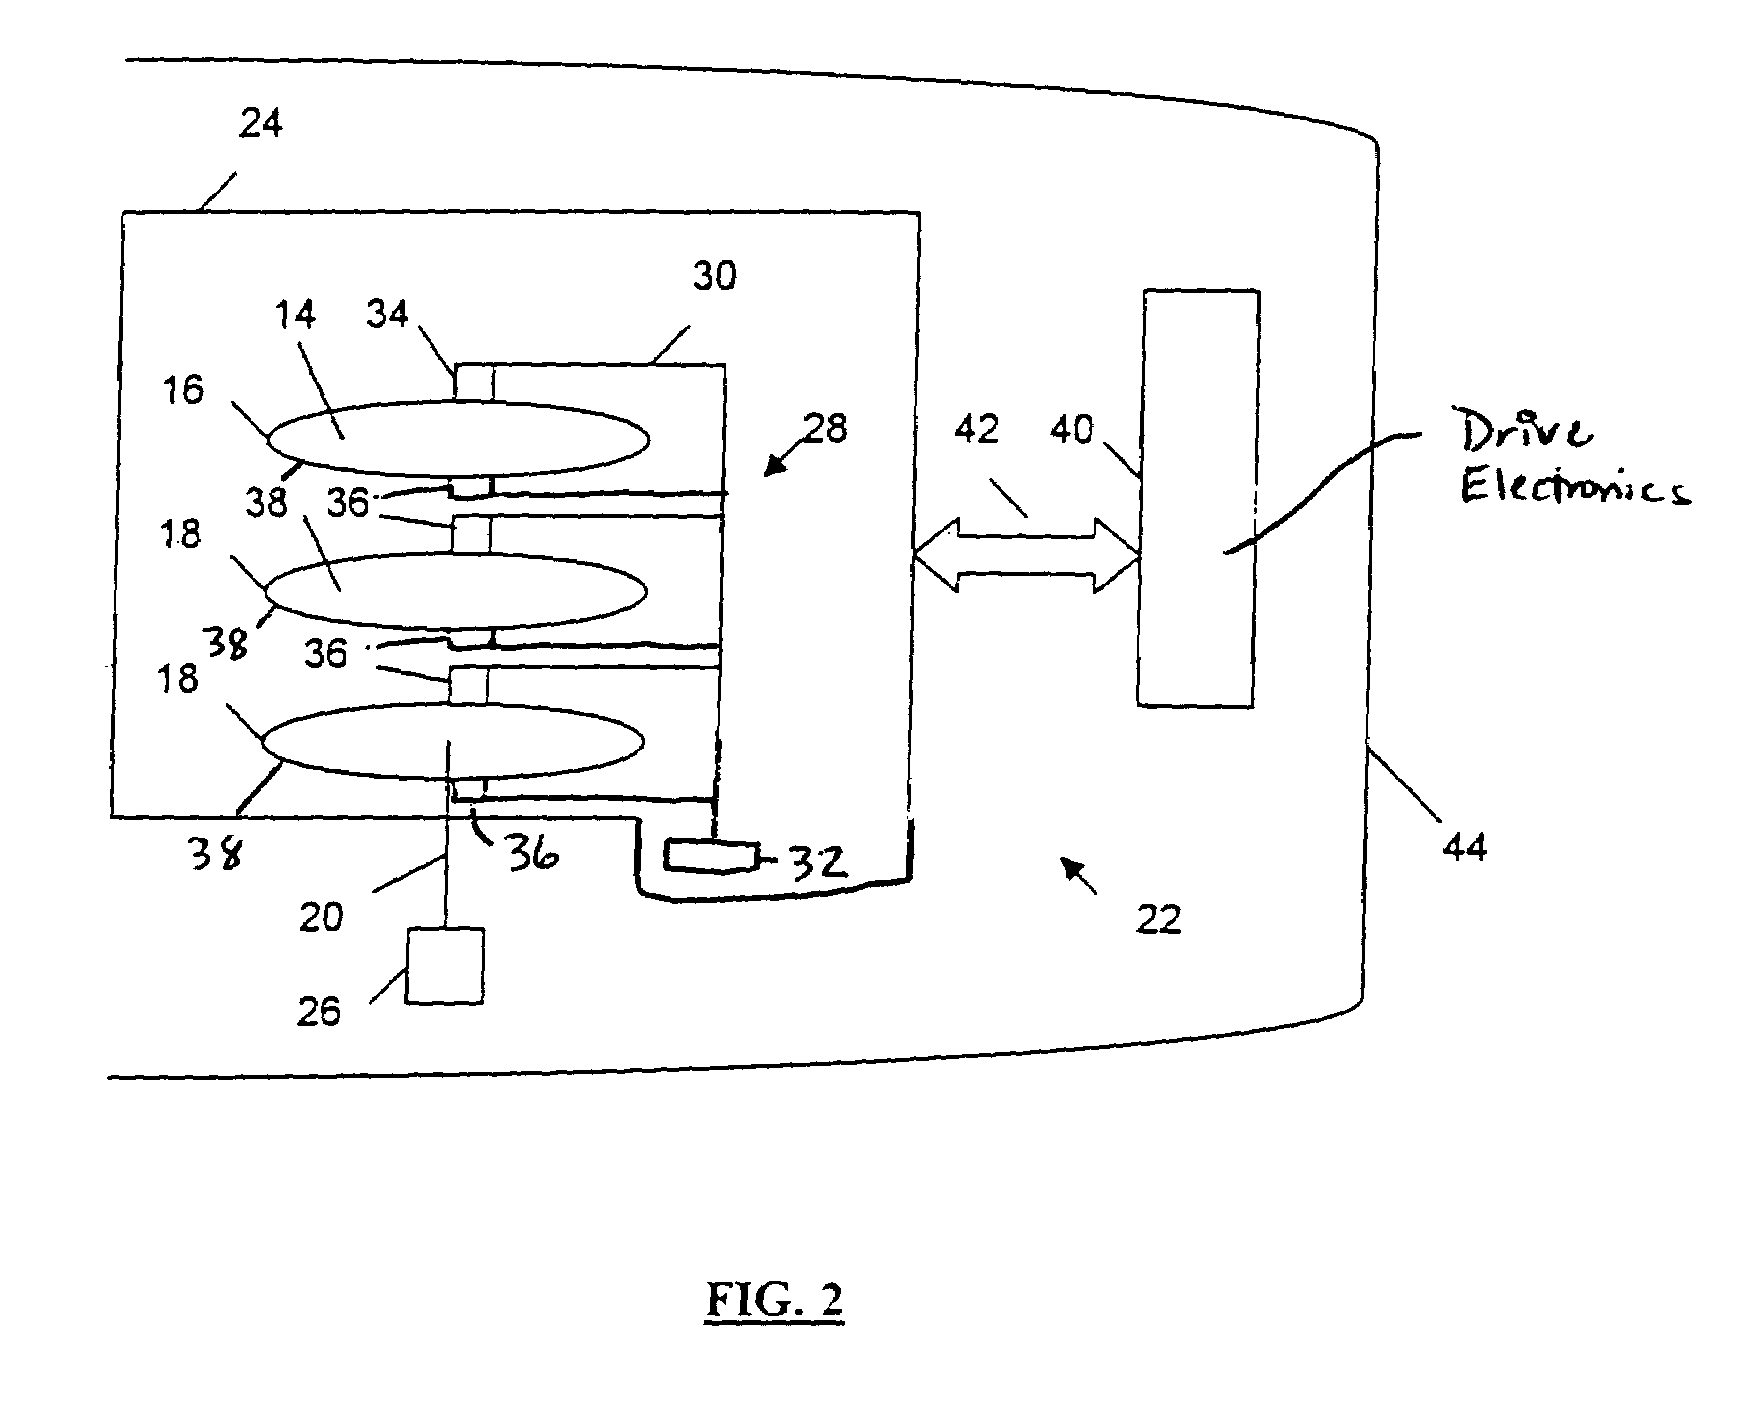 Disk drive self-servo writing using fundamental and higher harmonics of a printed reference pattern